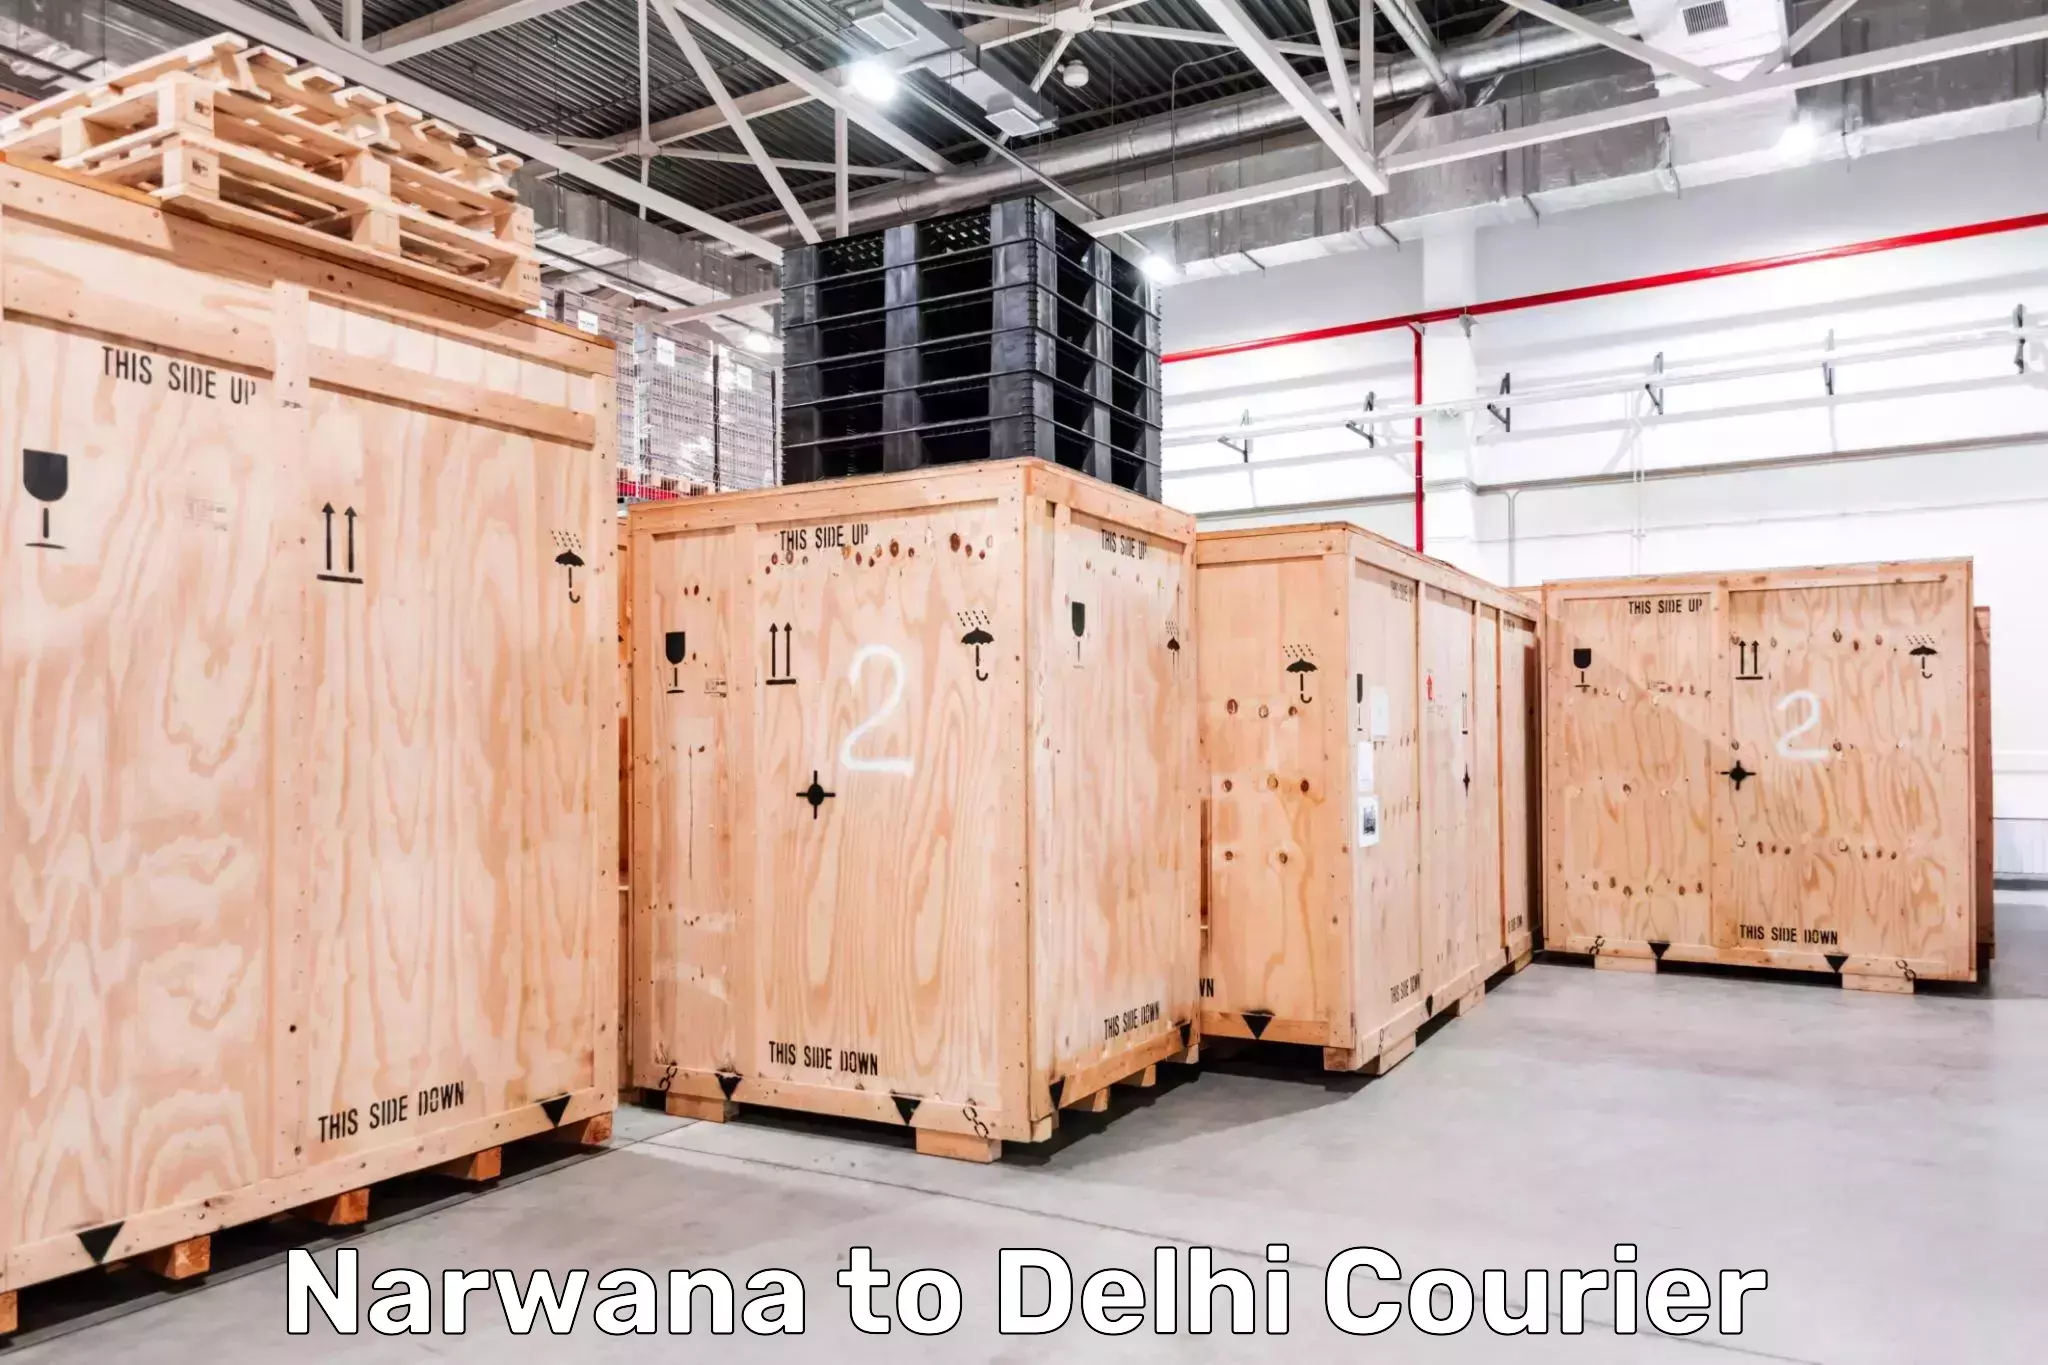 On-call courier service Narwana to Indraprastha